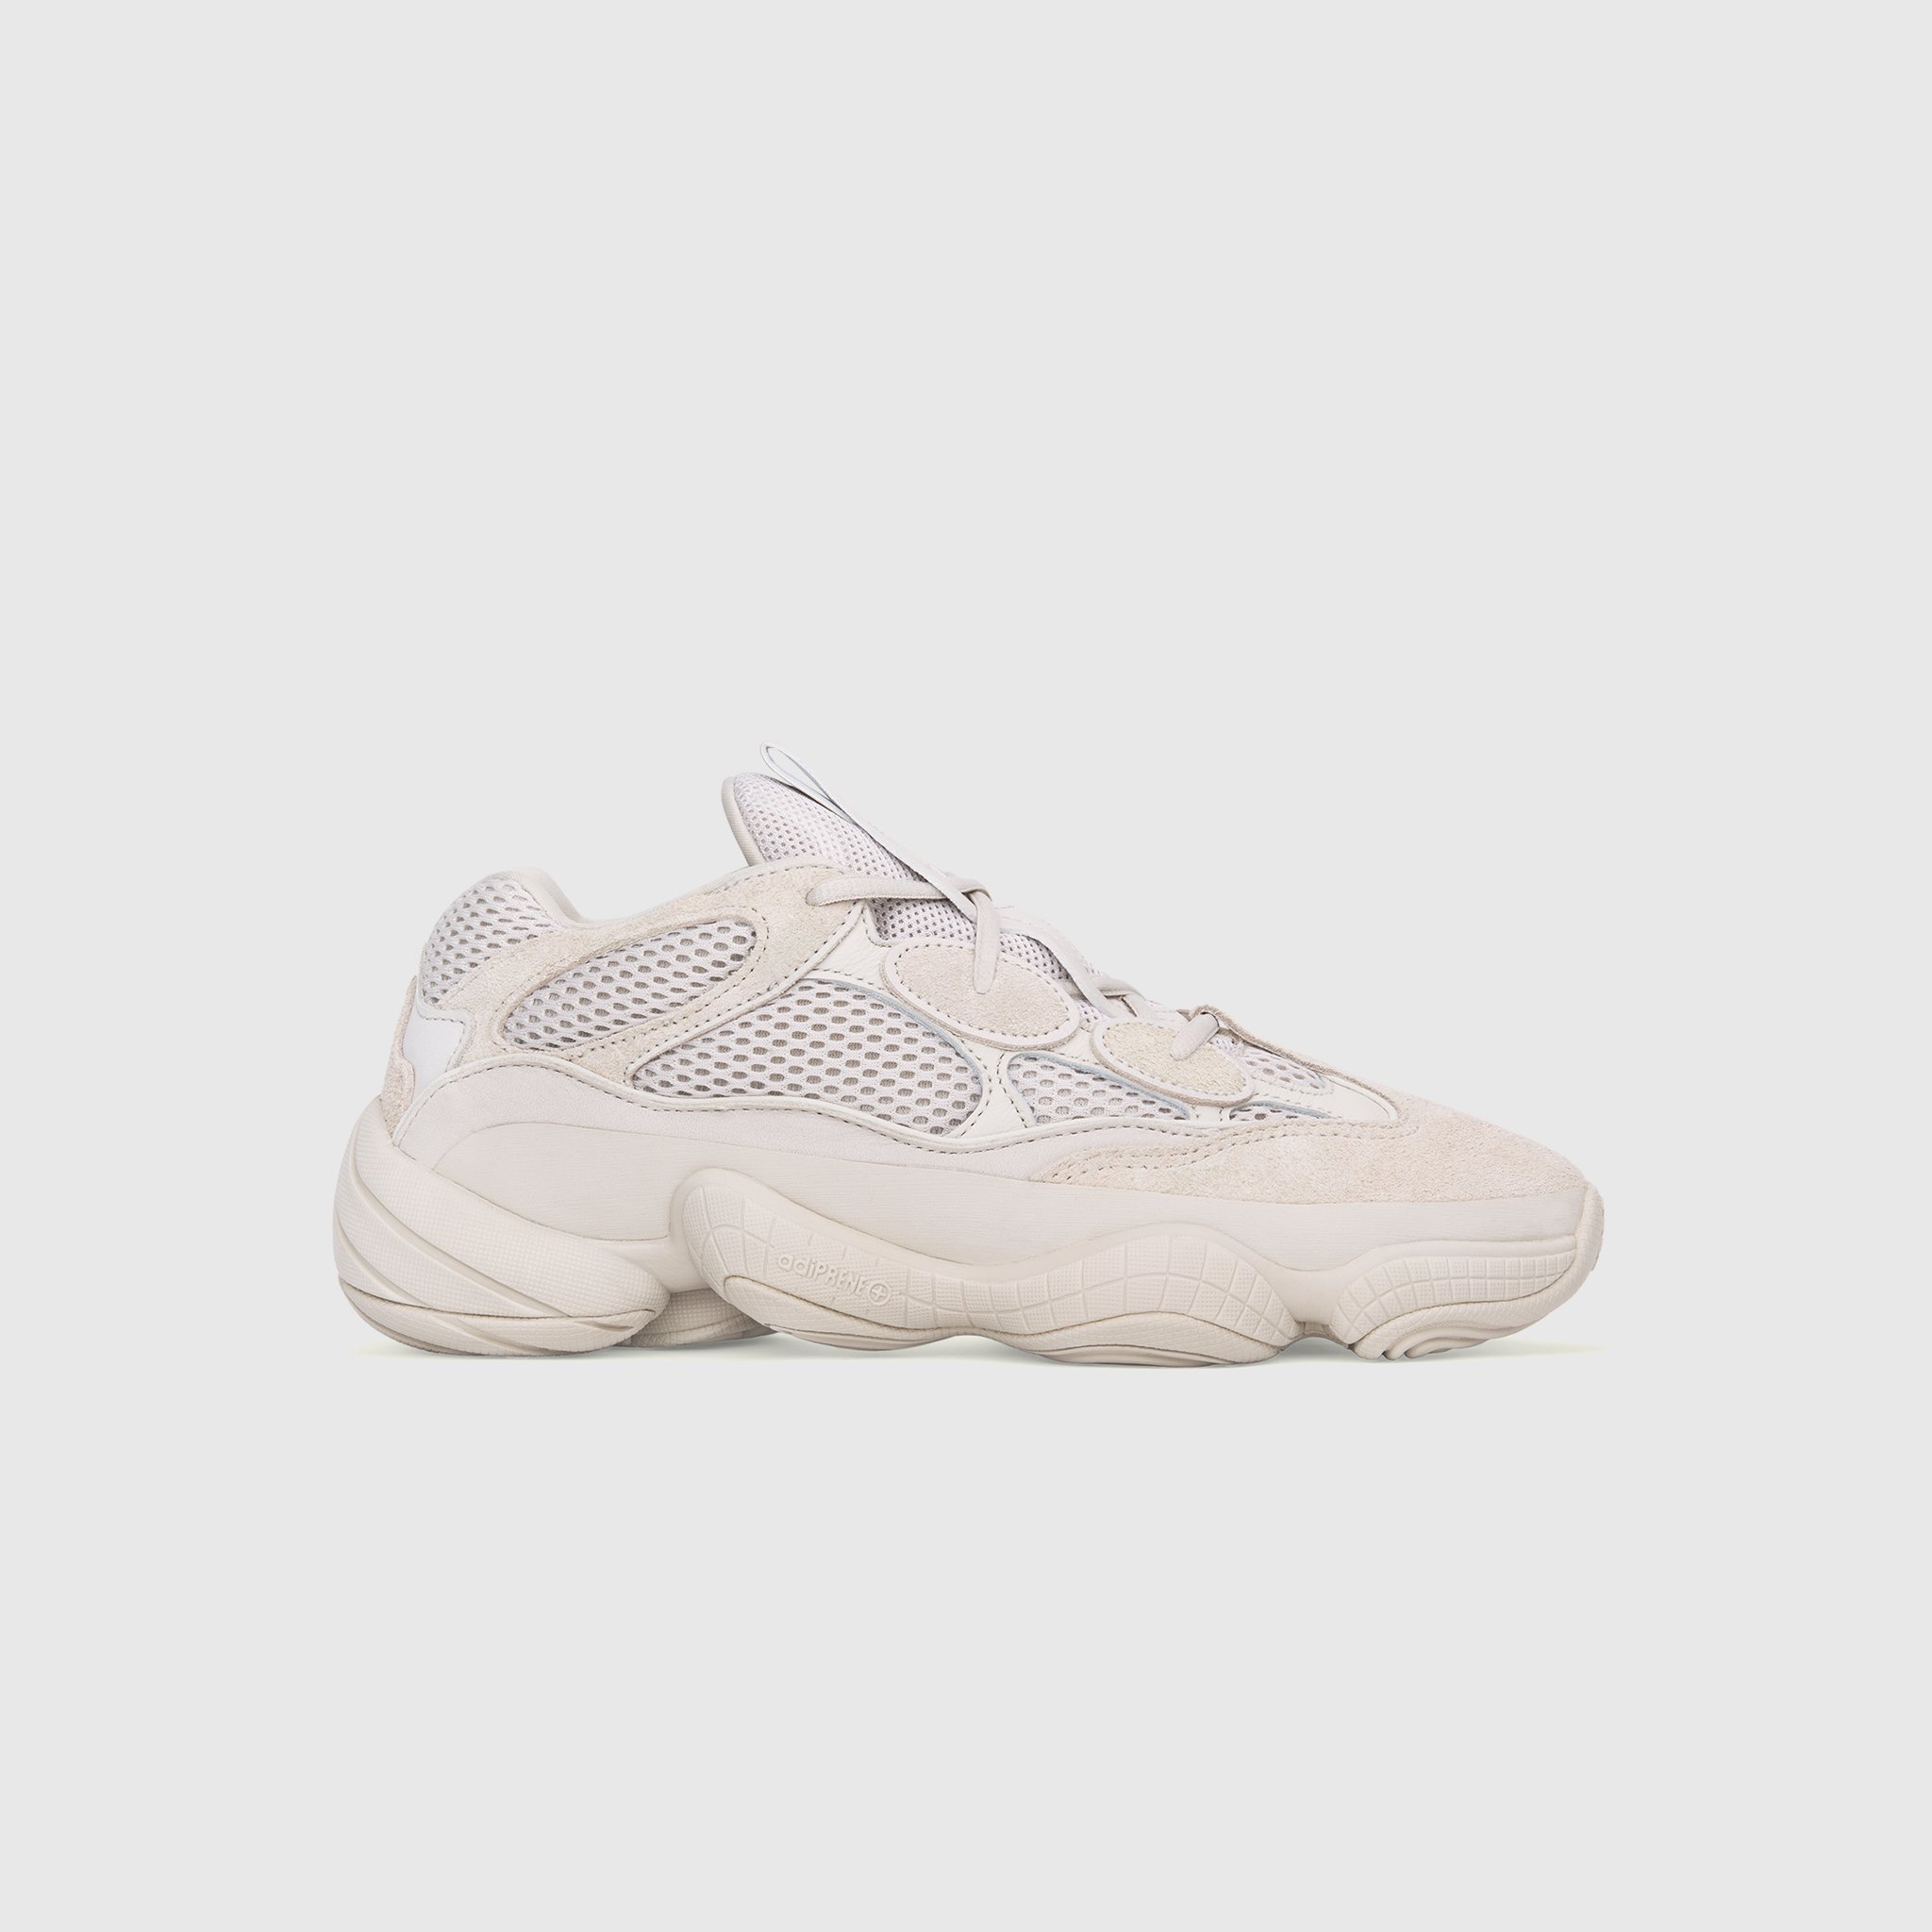 Foresee Round and round liberal ADIDAS YEEZY 500 "BLUSH" – PACKER SHOES